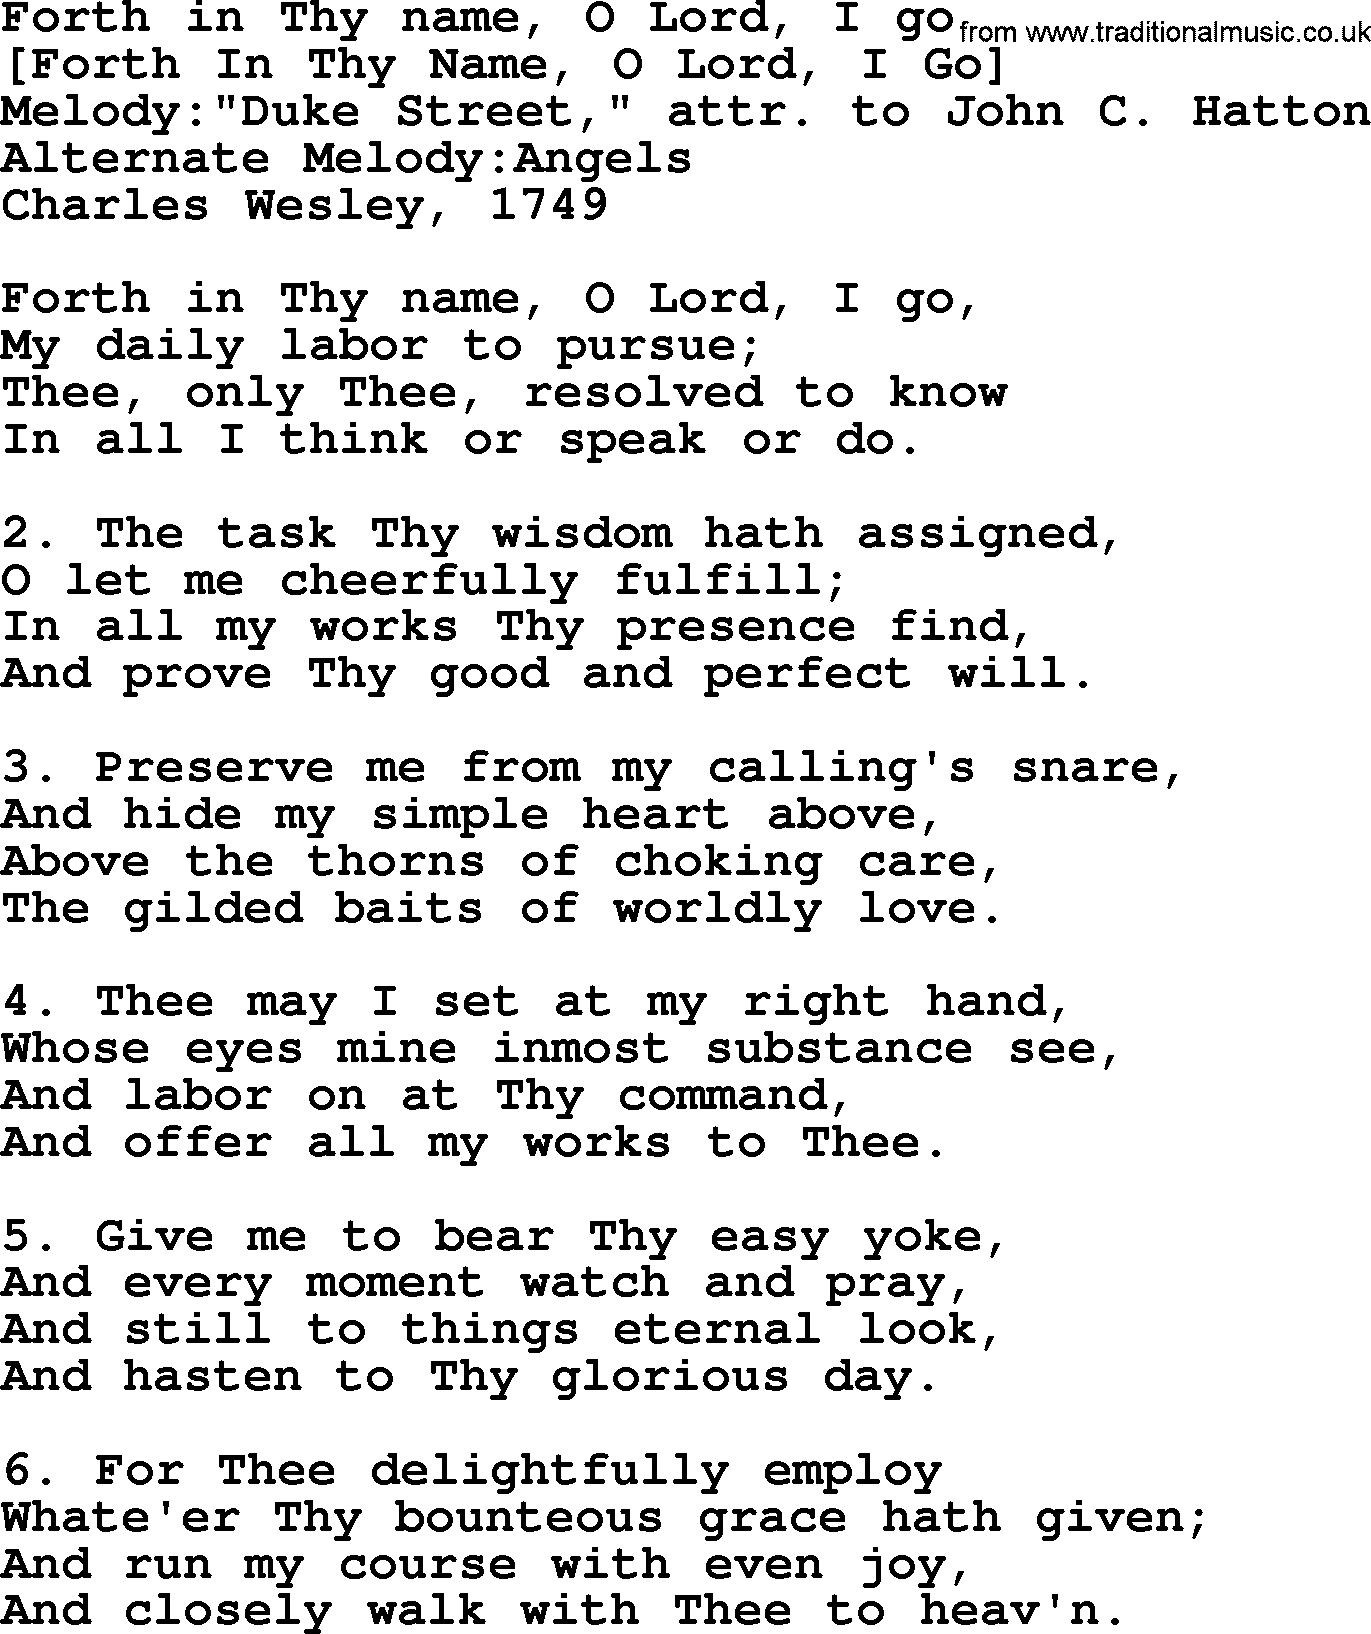 Old English Song: Forth In Thy Name, O Lord, I Go lyrics